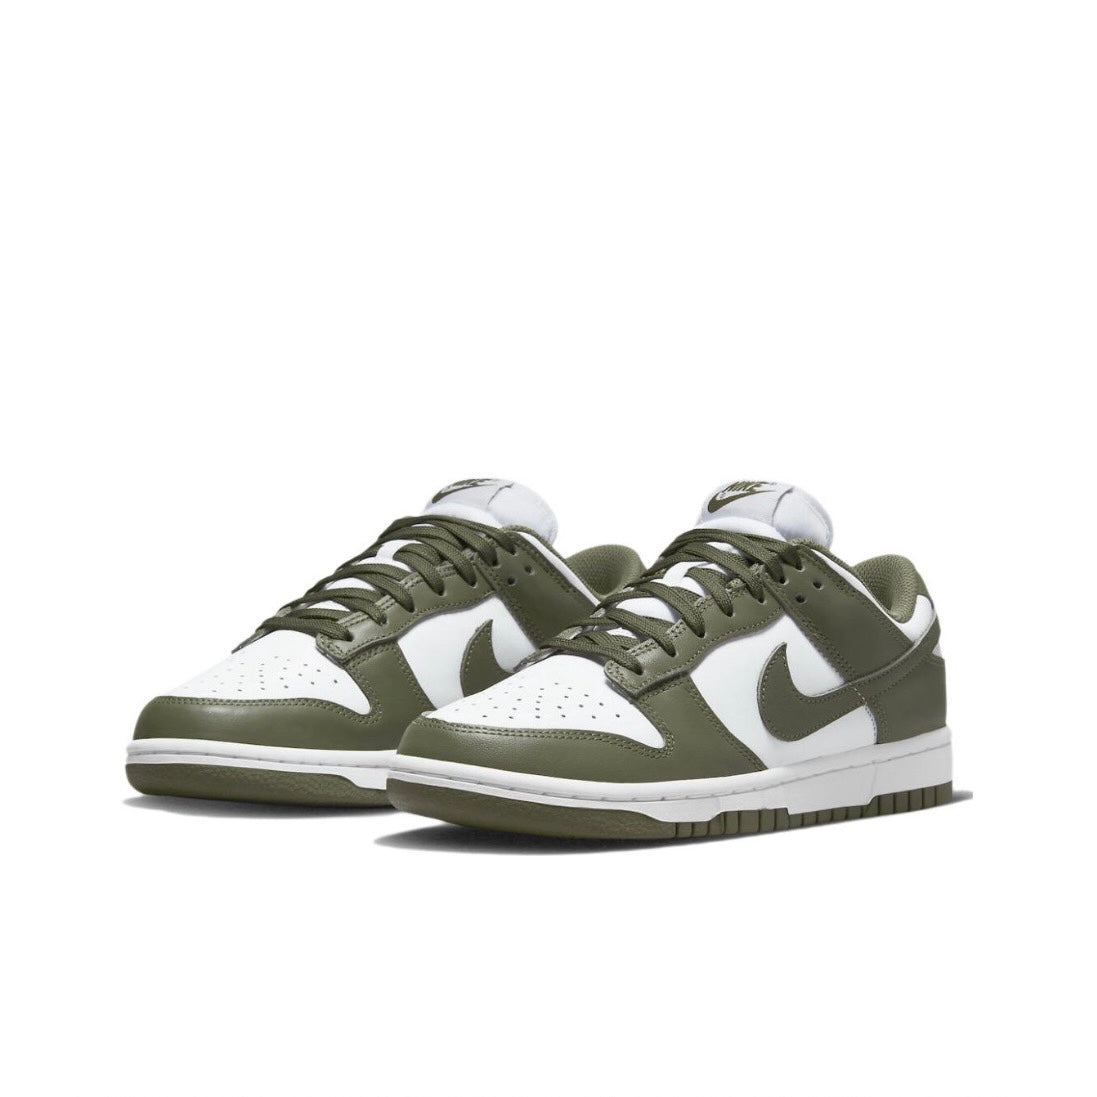 NIKE DUNK LOW - OLIVE WOMENS